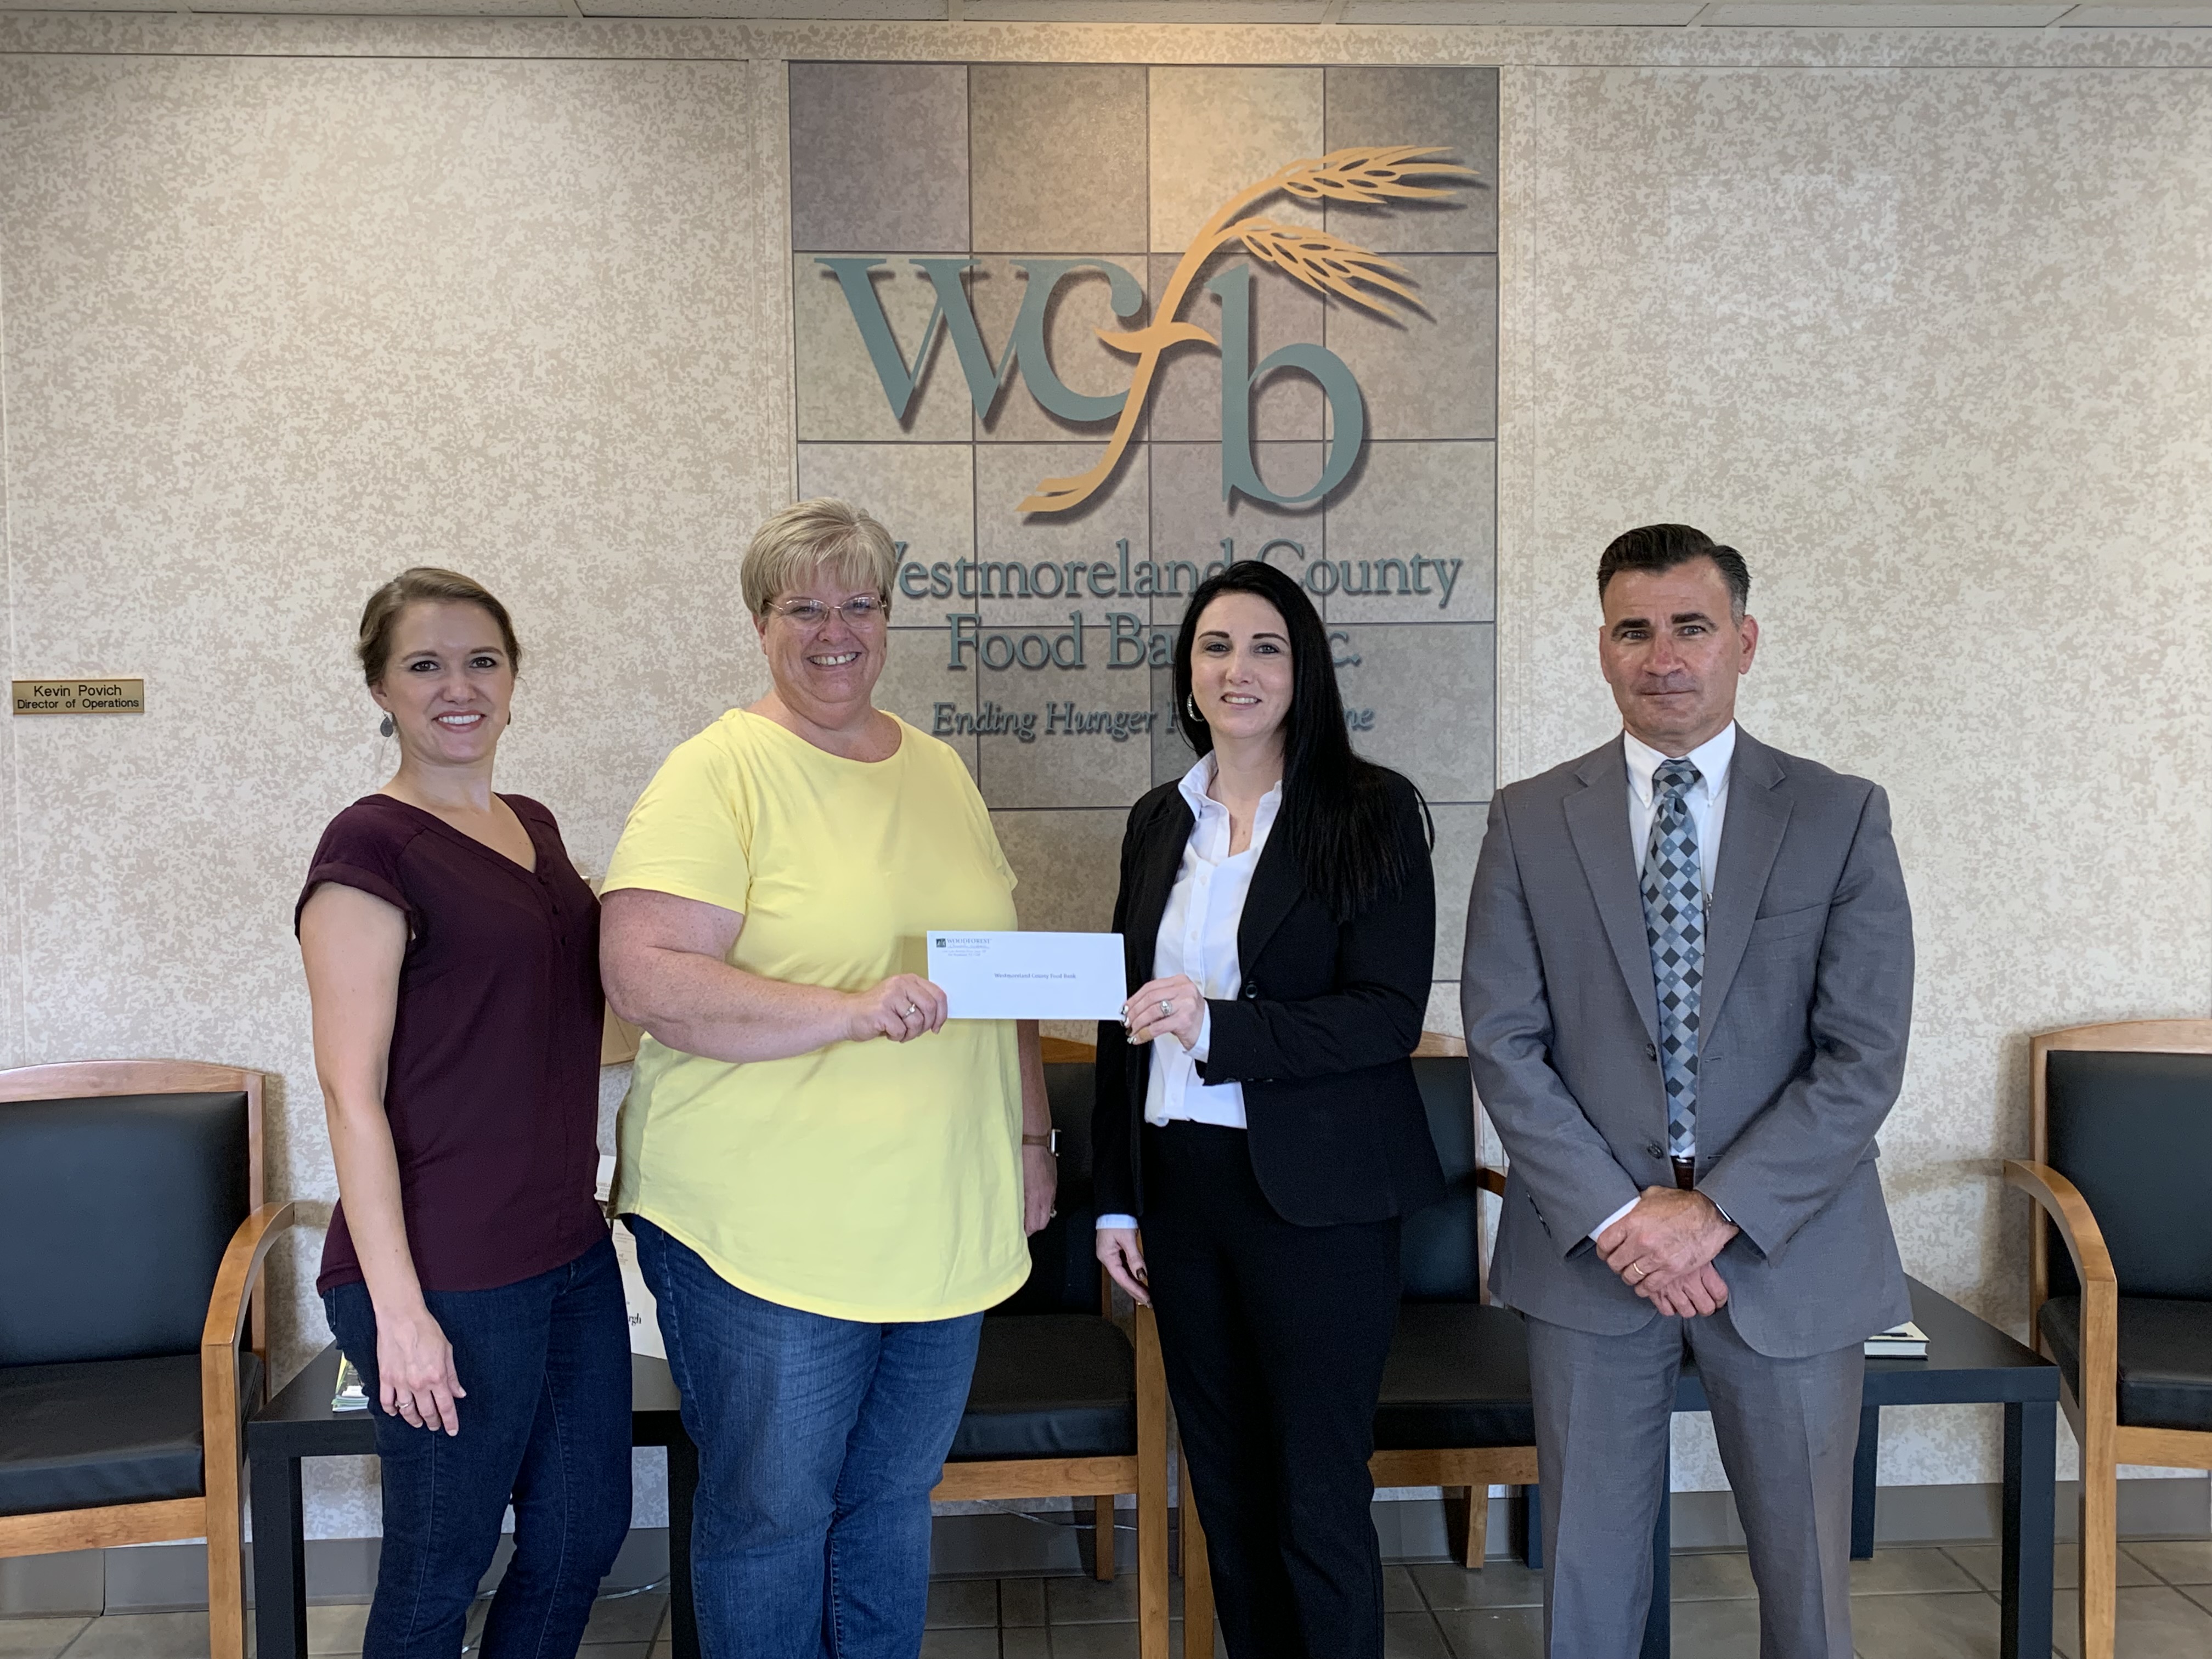 Westmoreland County Food Bank recently received a $1,560.00 donation from WCF.